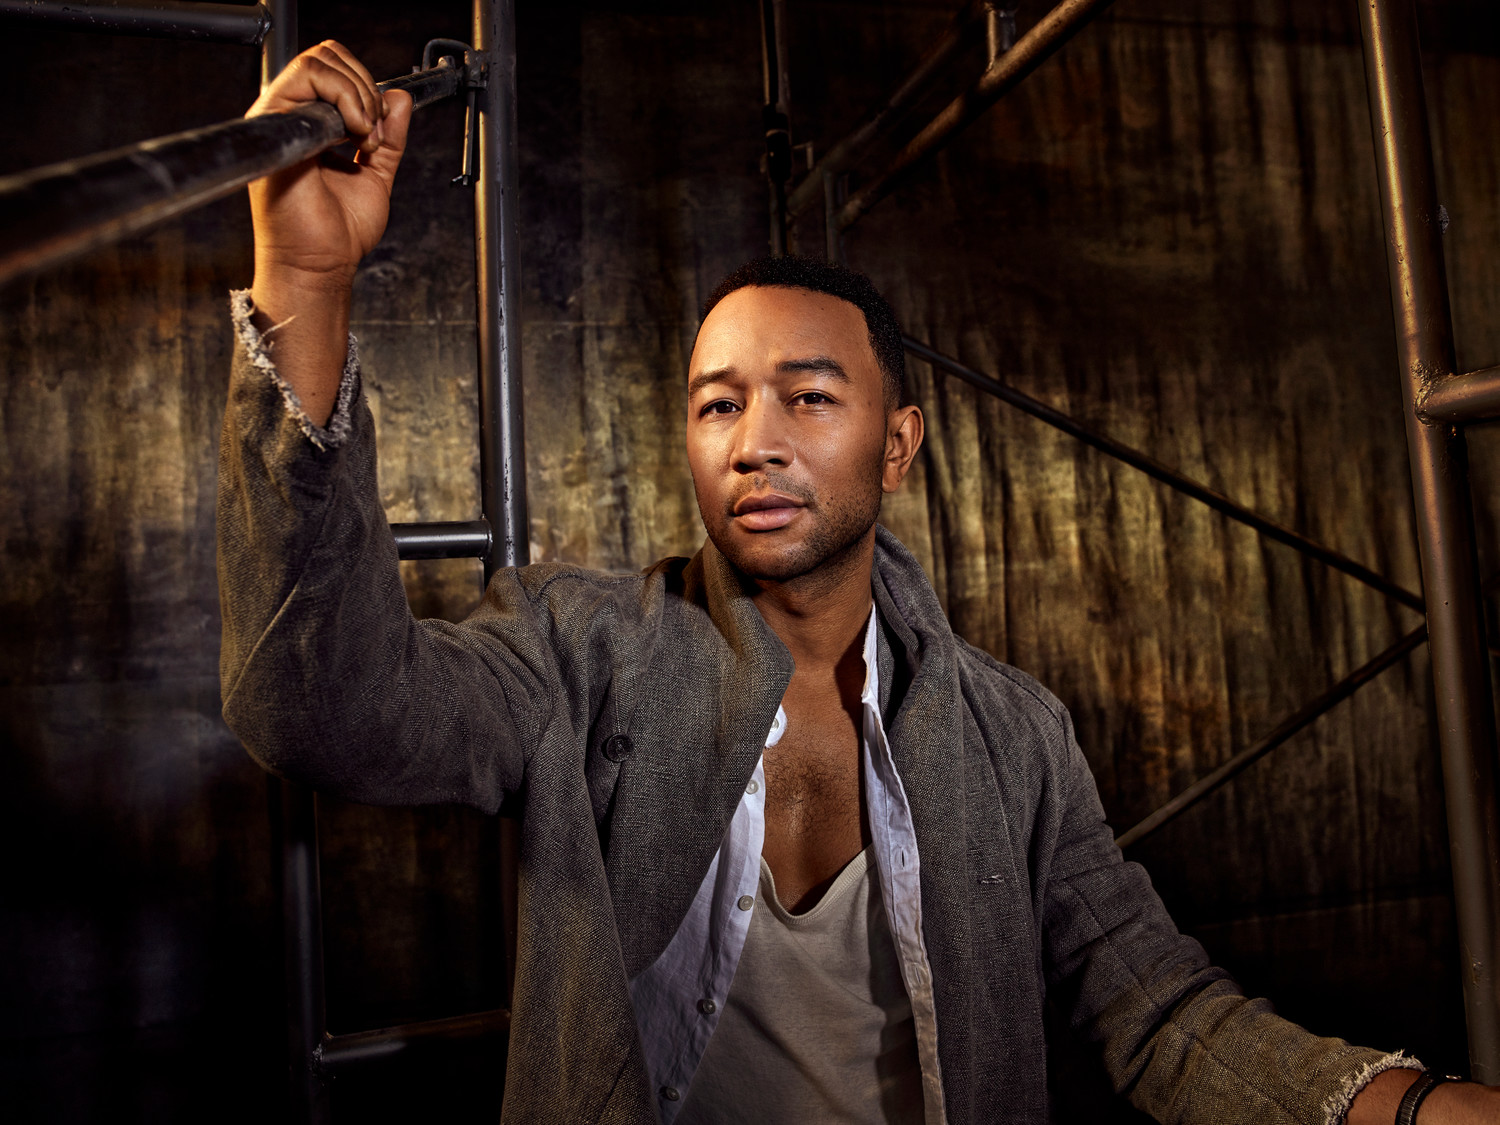 John Legend will portray Christ in the NBC production of "Jesus Christ Superstar Live in Concert," airing April 1.